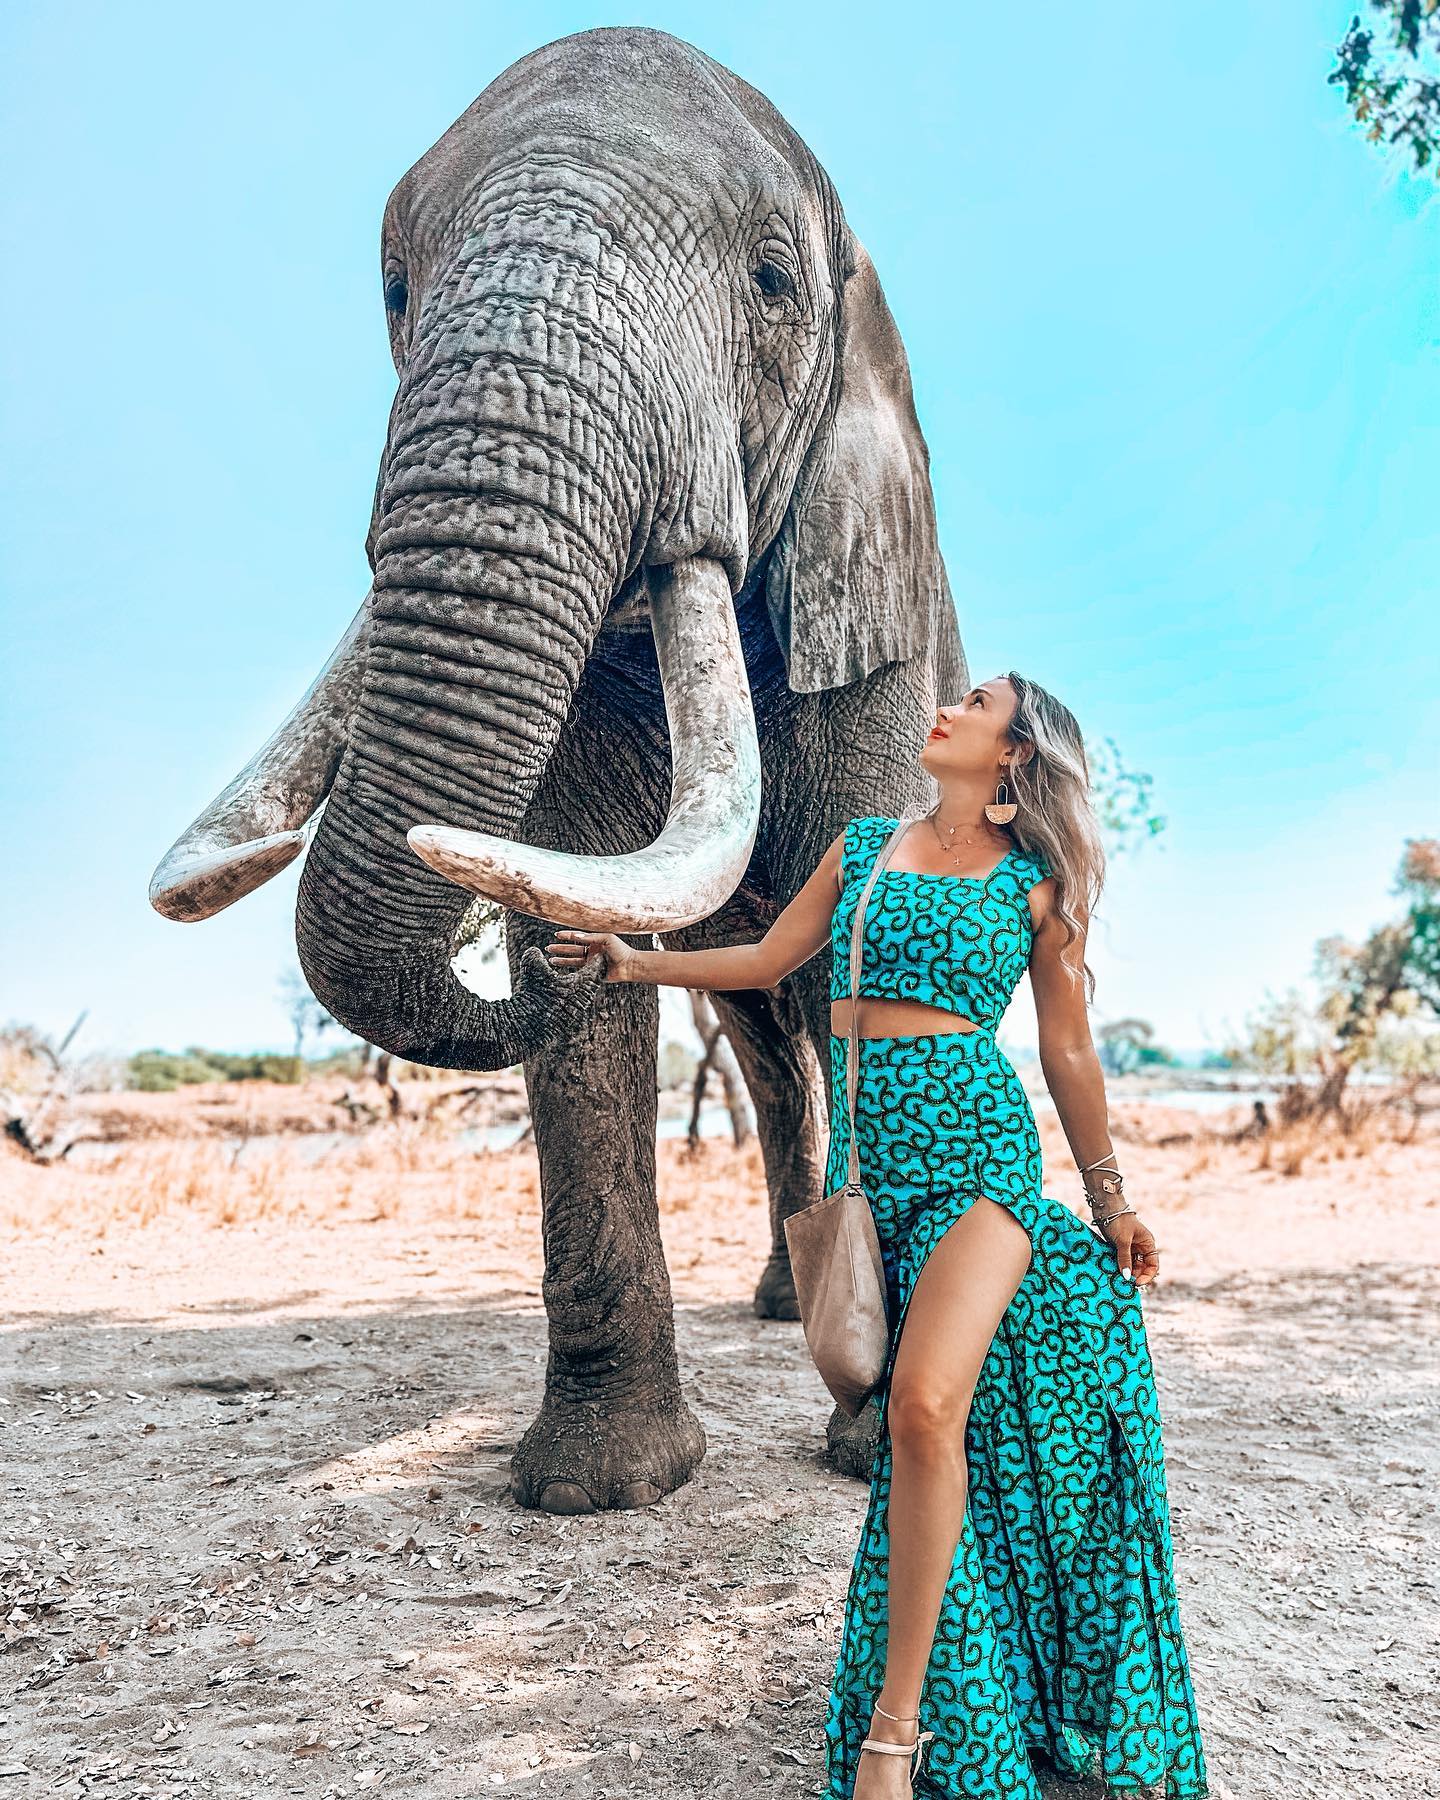 Finally getting a chance to post after over a week! So starting out with an elephant rescue I went to 6 years ago that I am grateful to have brought my group to last week!

This is at @theelephantcafezambia — one of the few places I have heard of that used to allow elephant riding, but stopped when they saw that many people were against it on social media. Instead, they opened a beautiful lunch spot with incredible food, and they use that to profit (both for the humans and the elephants) instead of forcing the animals to be ridden.

The elephants are still free-roaming 正规极速赛车平台✪As well, but they will come up to the cafe area for “treats” which is how you can take photos with them. It’s still not total freedom but at least a step in the right direction.

Is meeting an elephant on your bucketlist? Which of these is getting put on my CasitAlyssa wall??

Moments from my recent @mylifesatraveltribe group trip in #zambia #zimbabwe #botswana #africa #mylifesatravelmovie